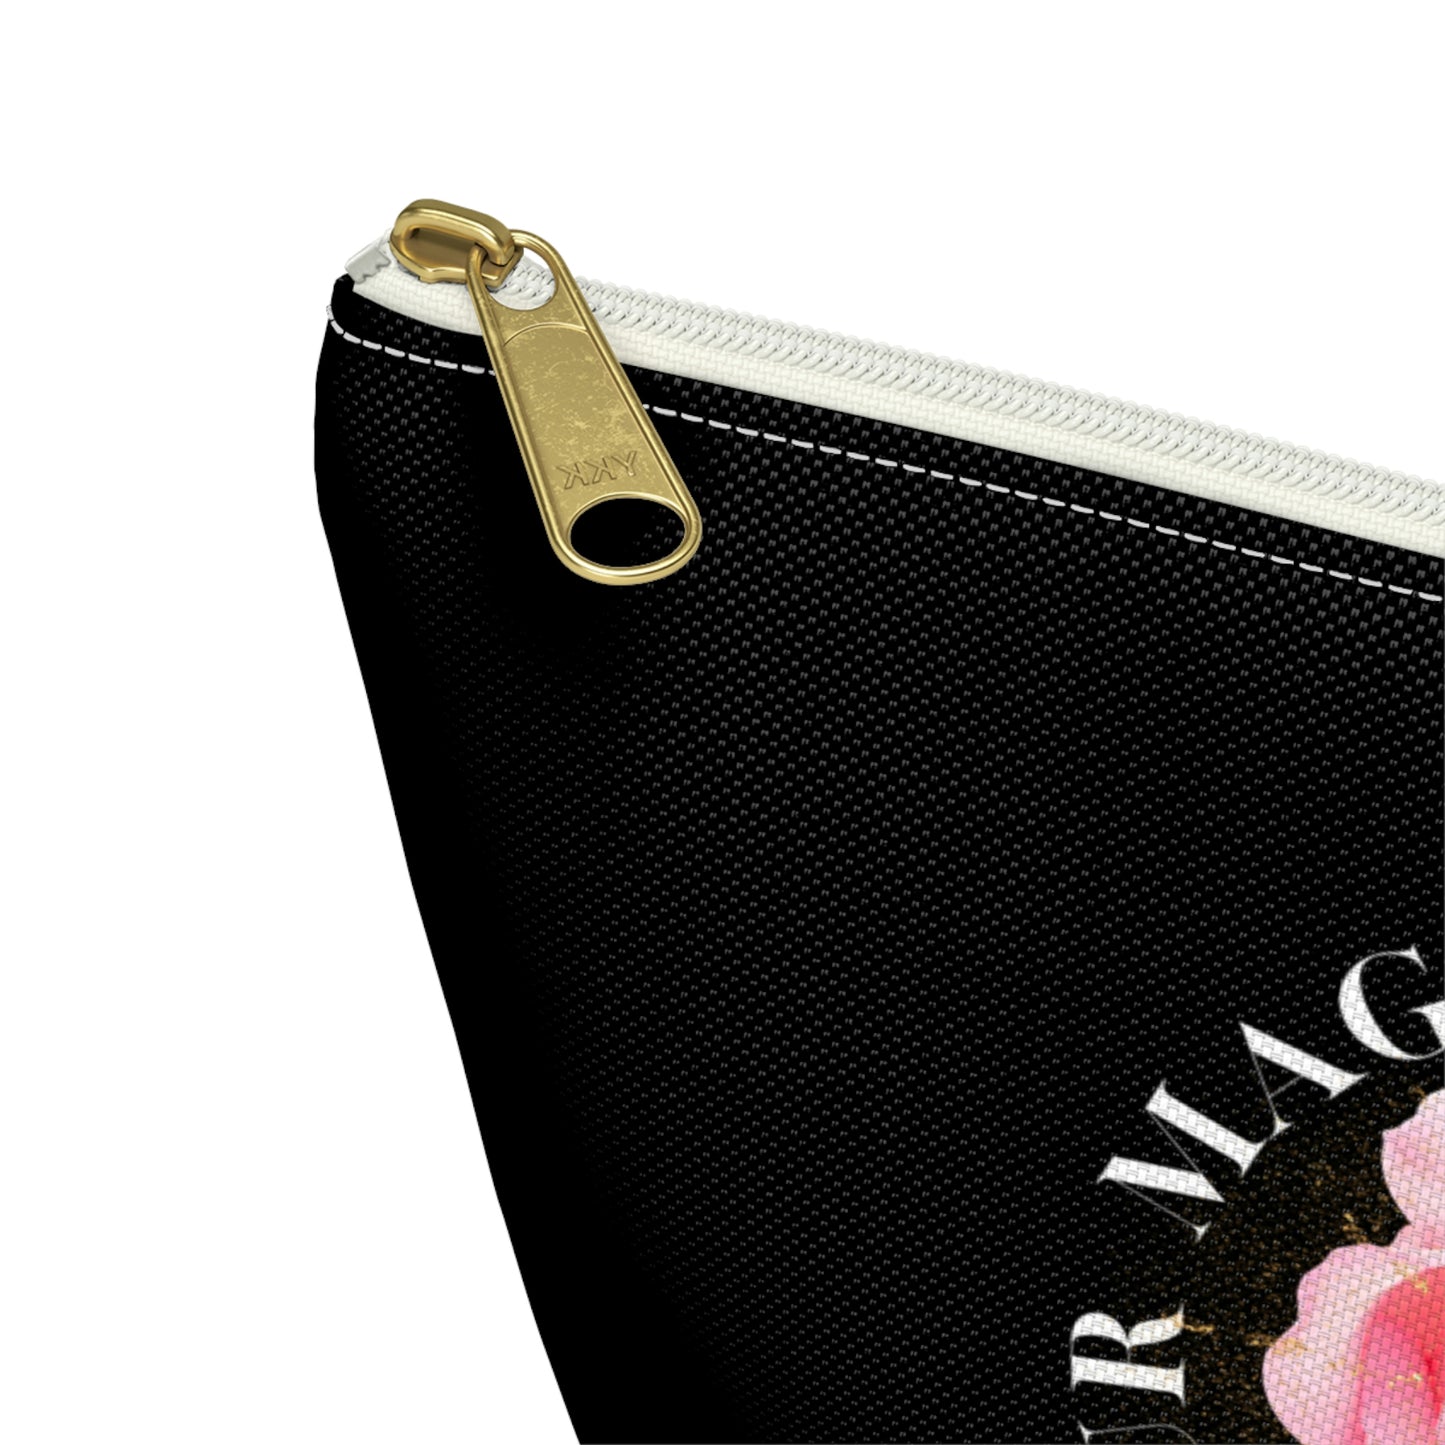 Your MAGIC lies within™ Radiant Rose- Accessory Pouch w T-bottom - Darlin Primrose